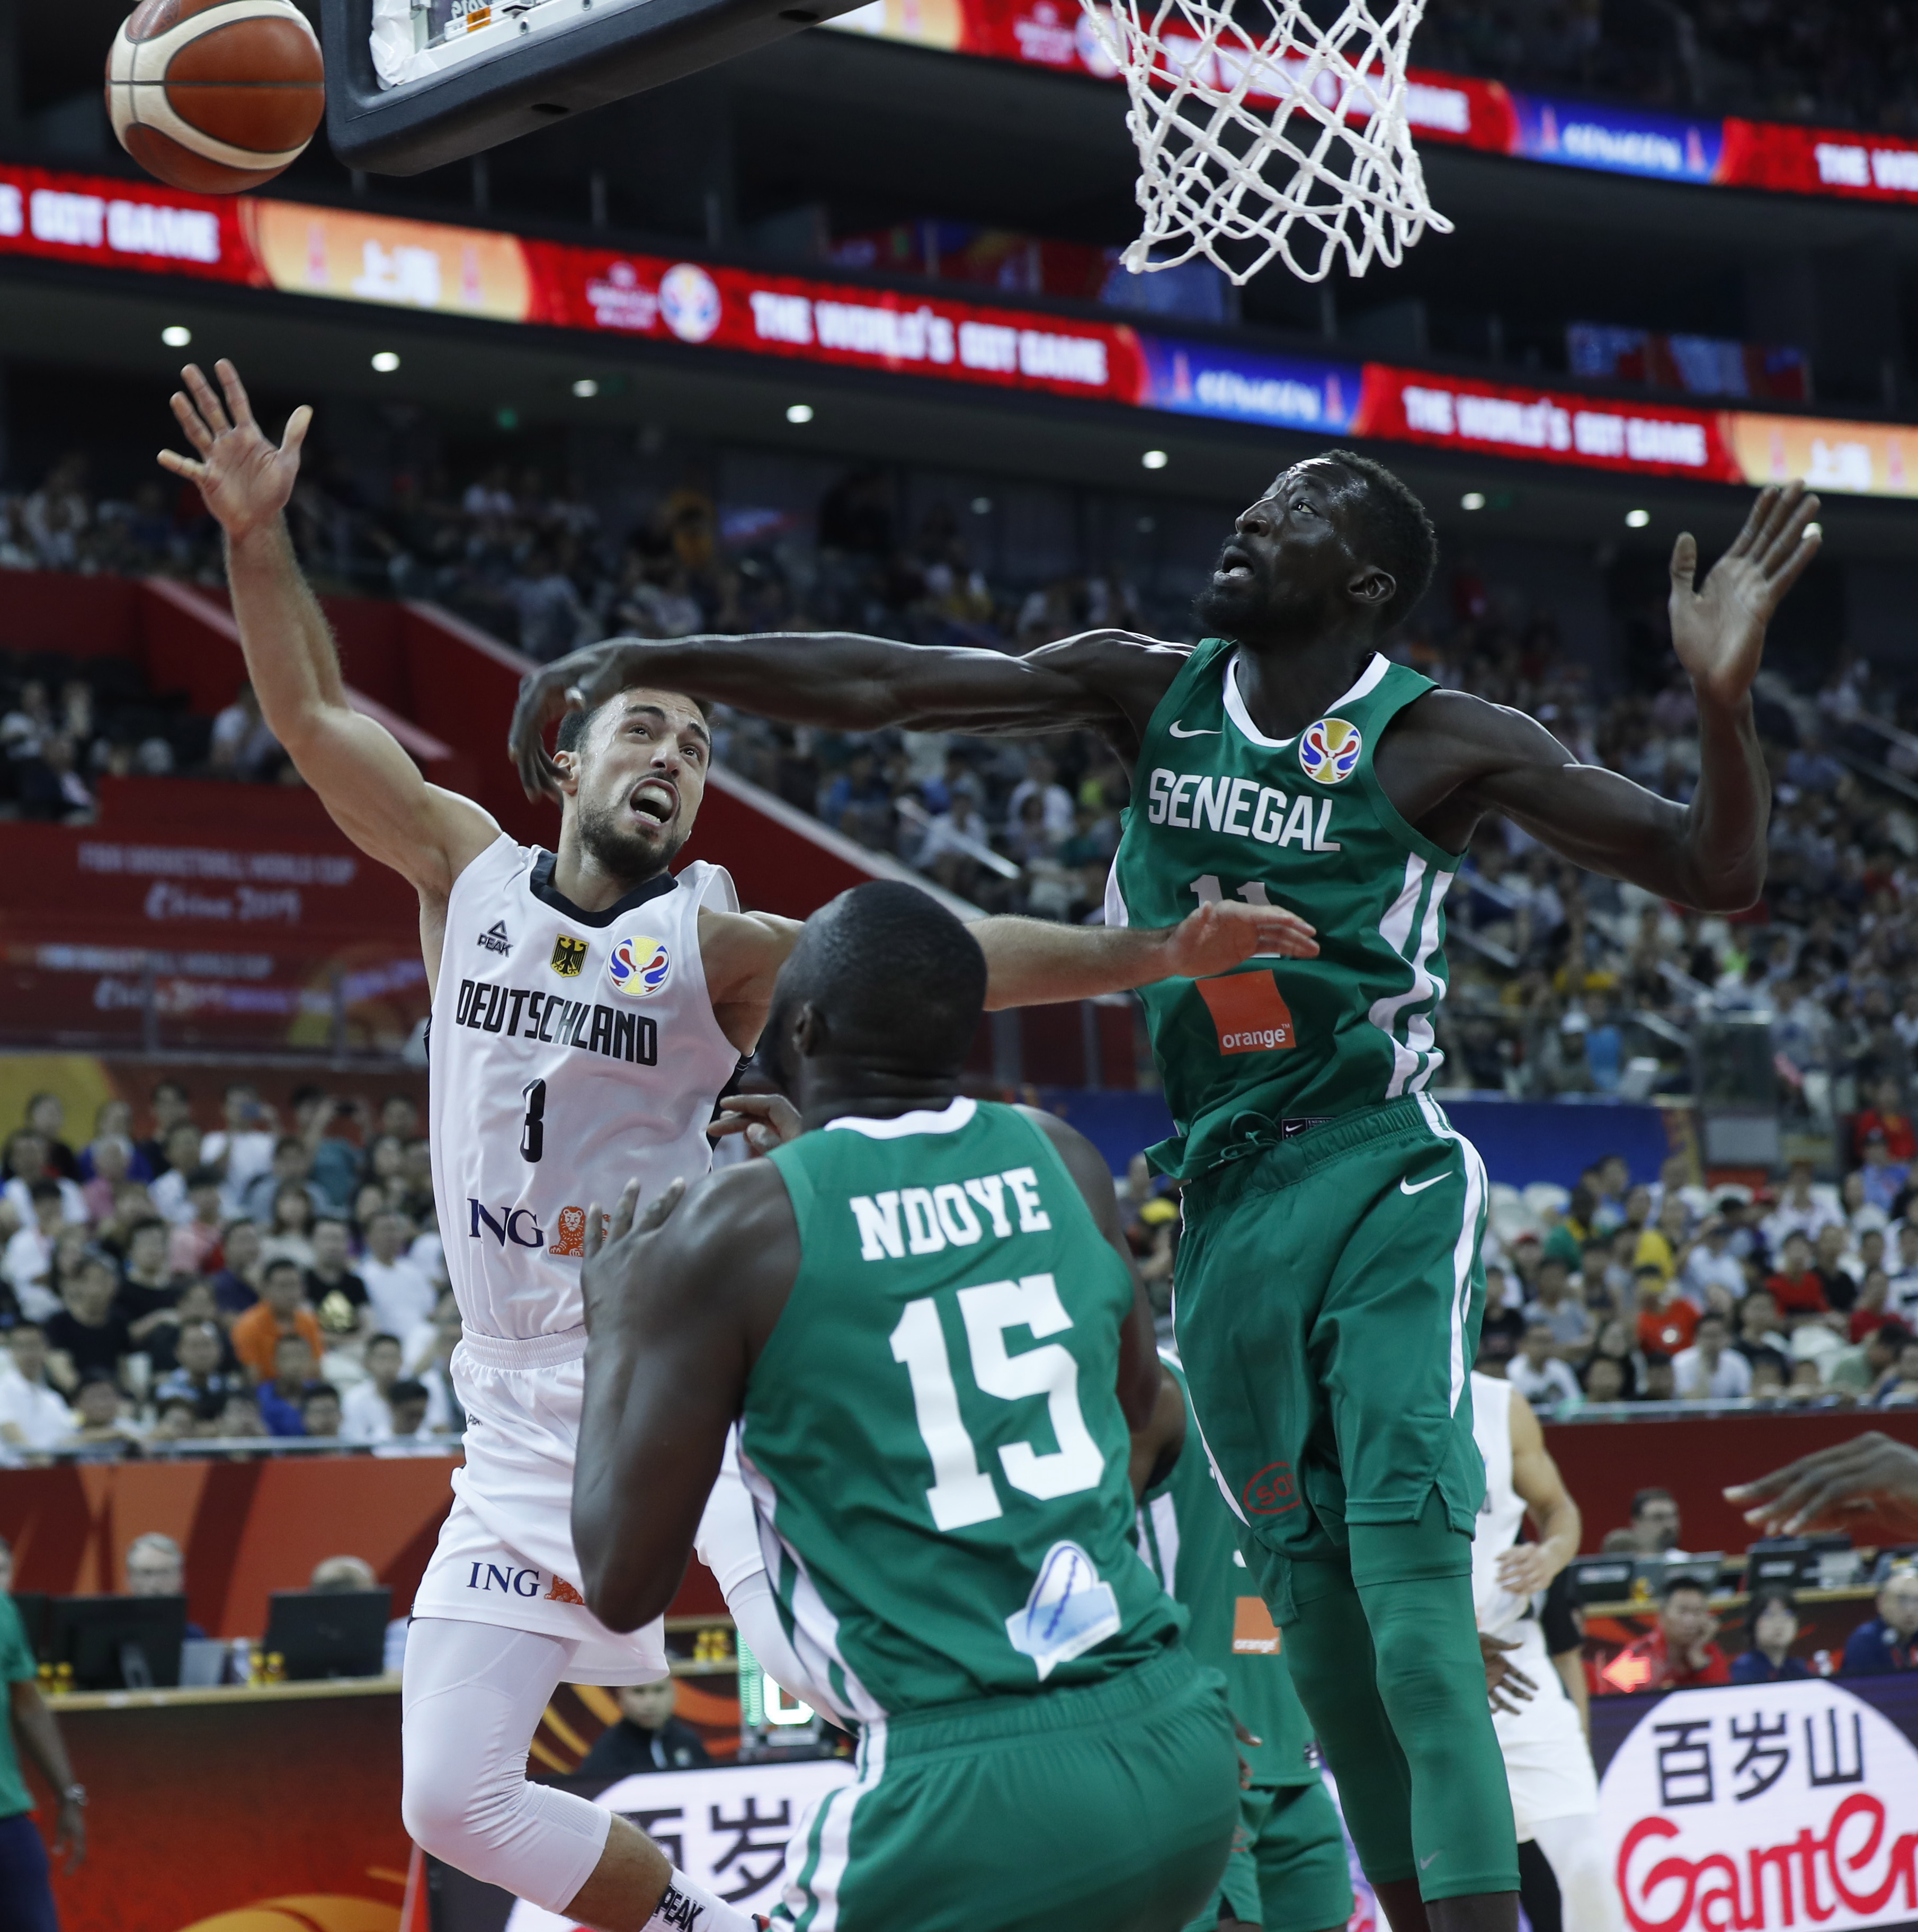 epa07825123 Ismet Akpinar of Germany (L) in action against Mouhammad Faye of Senegal (R) during the FIBA Basketball World Cup 2019 classification ​round​ match between Germany and Senegal in Shanghai, China, 07 September 2019.  EPA/WU HONG